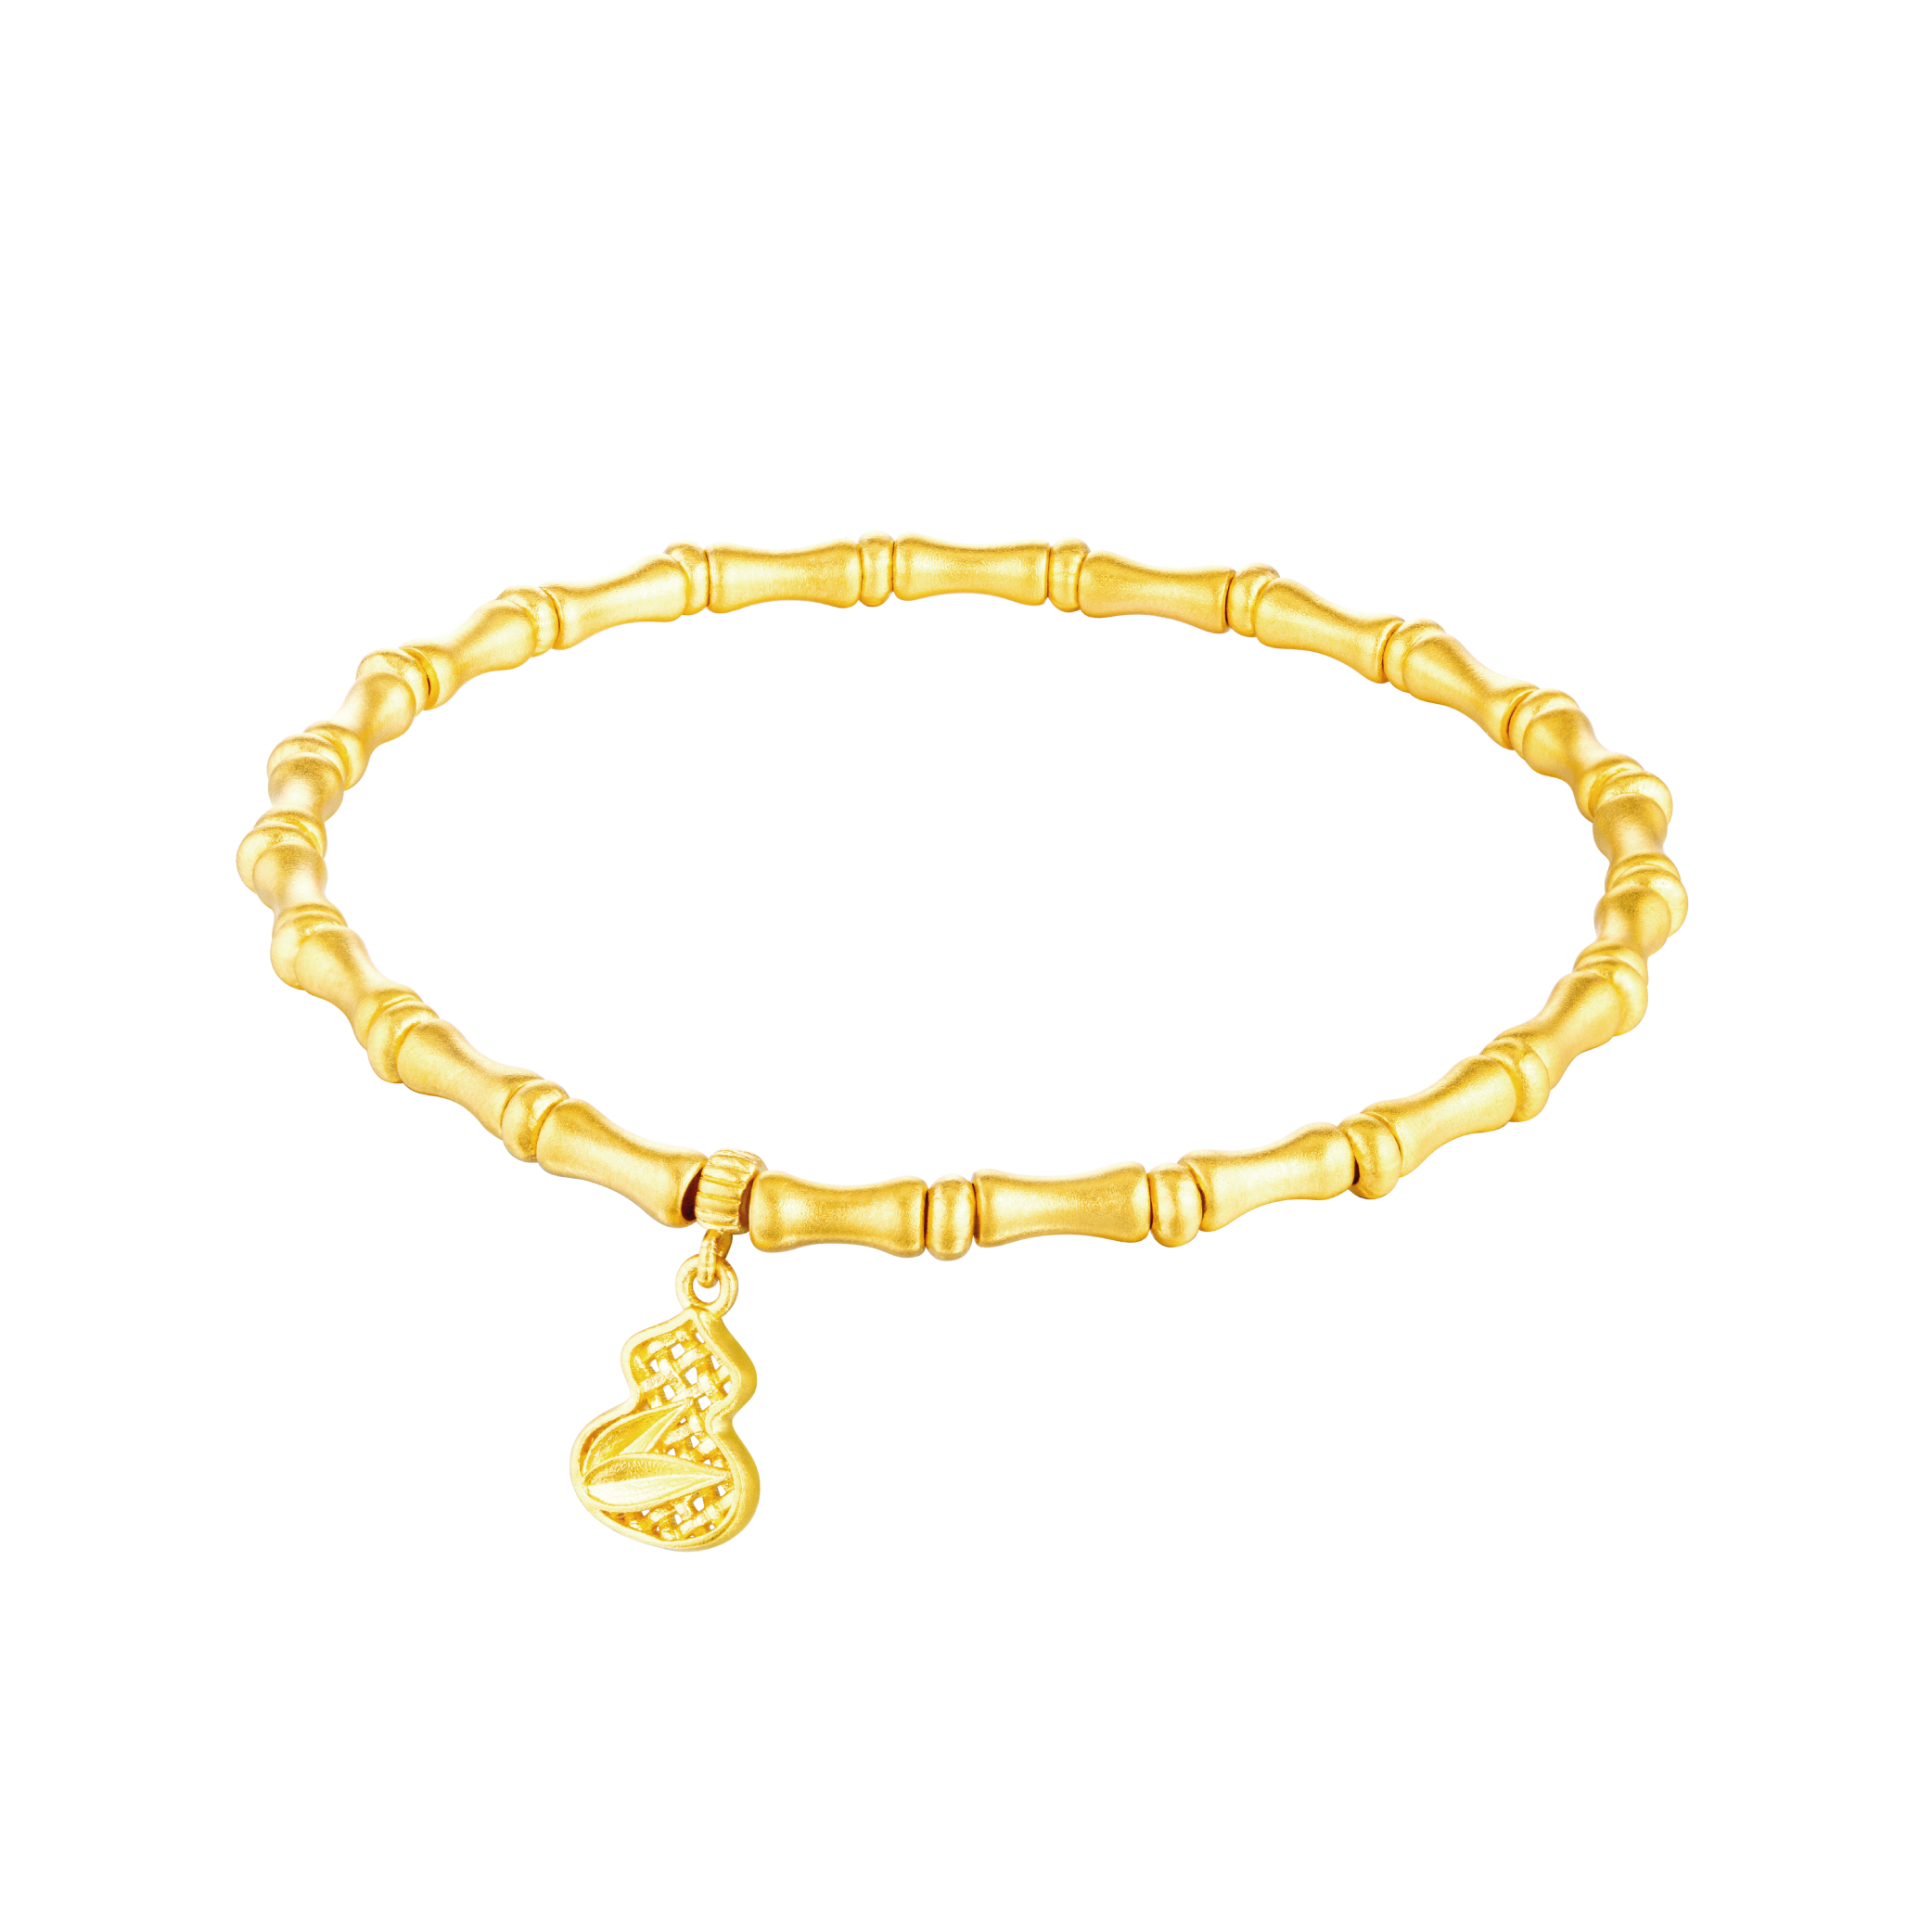 Heirloom Fortune Collection "Fortune & Rich" Gold Bracelet